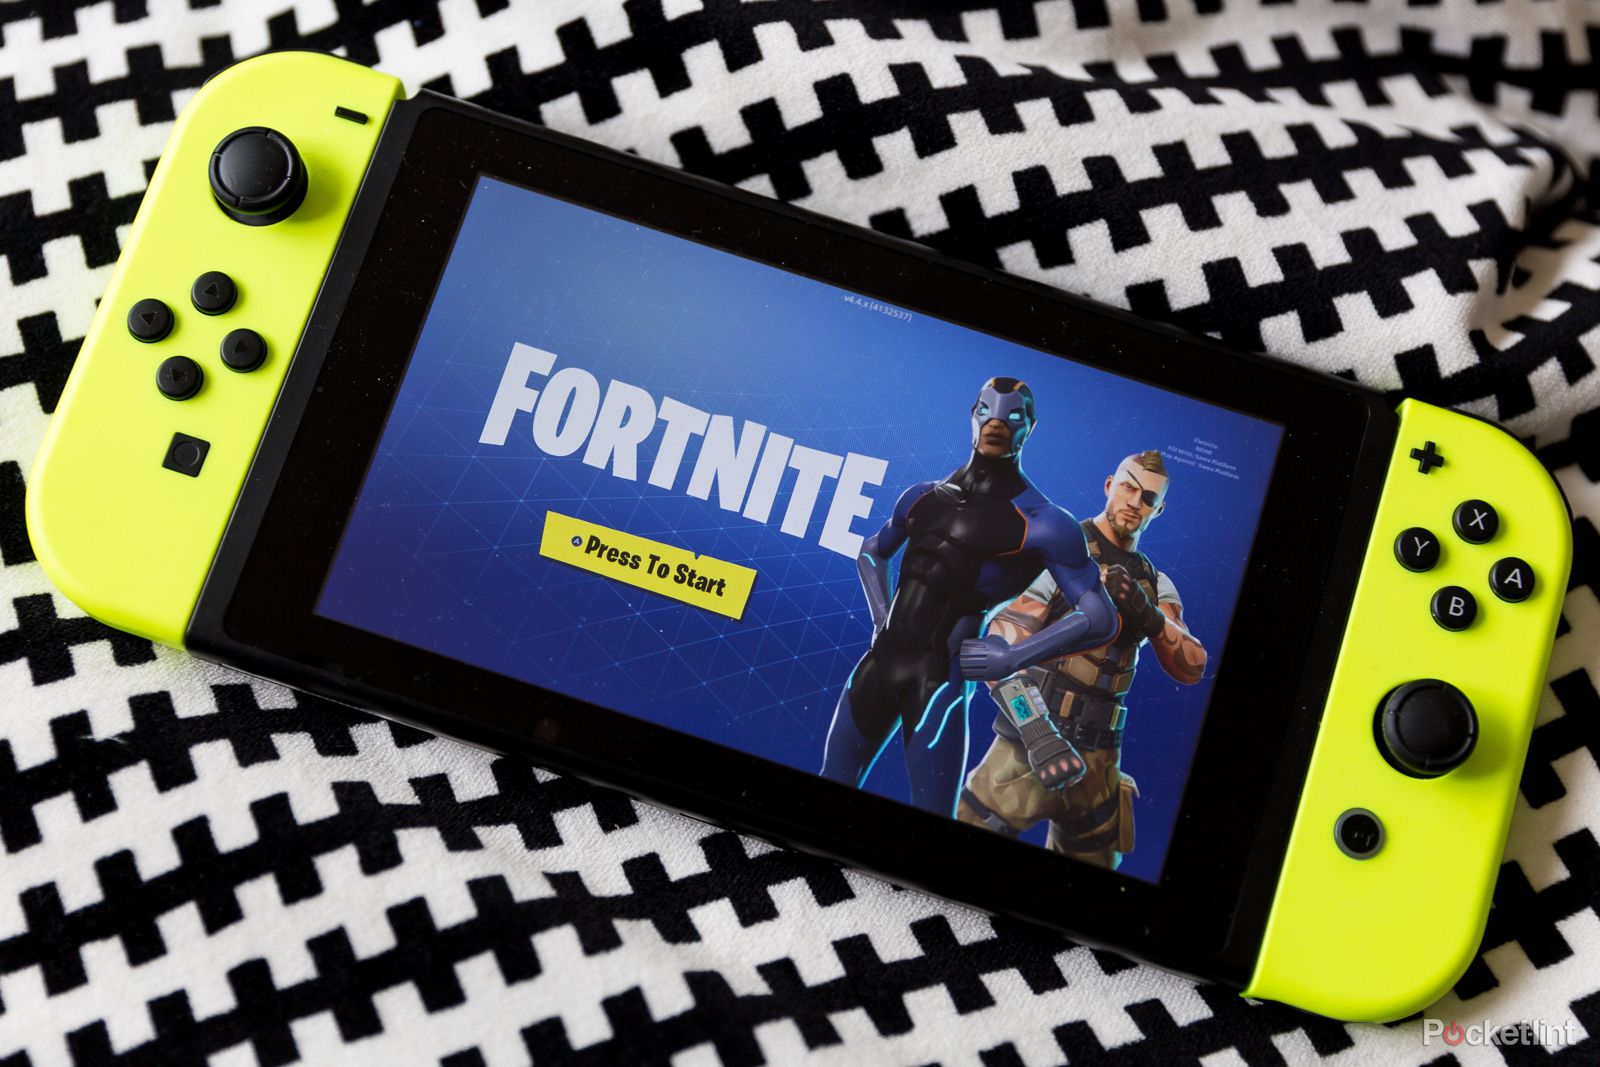 Fortnite loading screen on a Nintendo Switch with yellow Joy-Cons